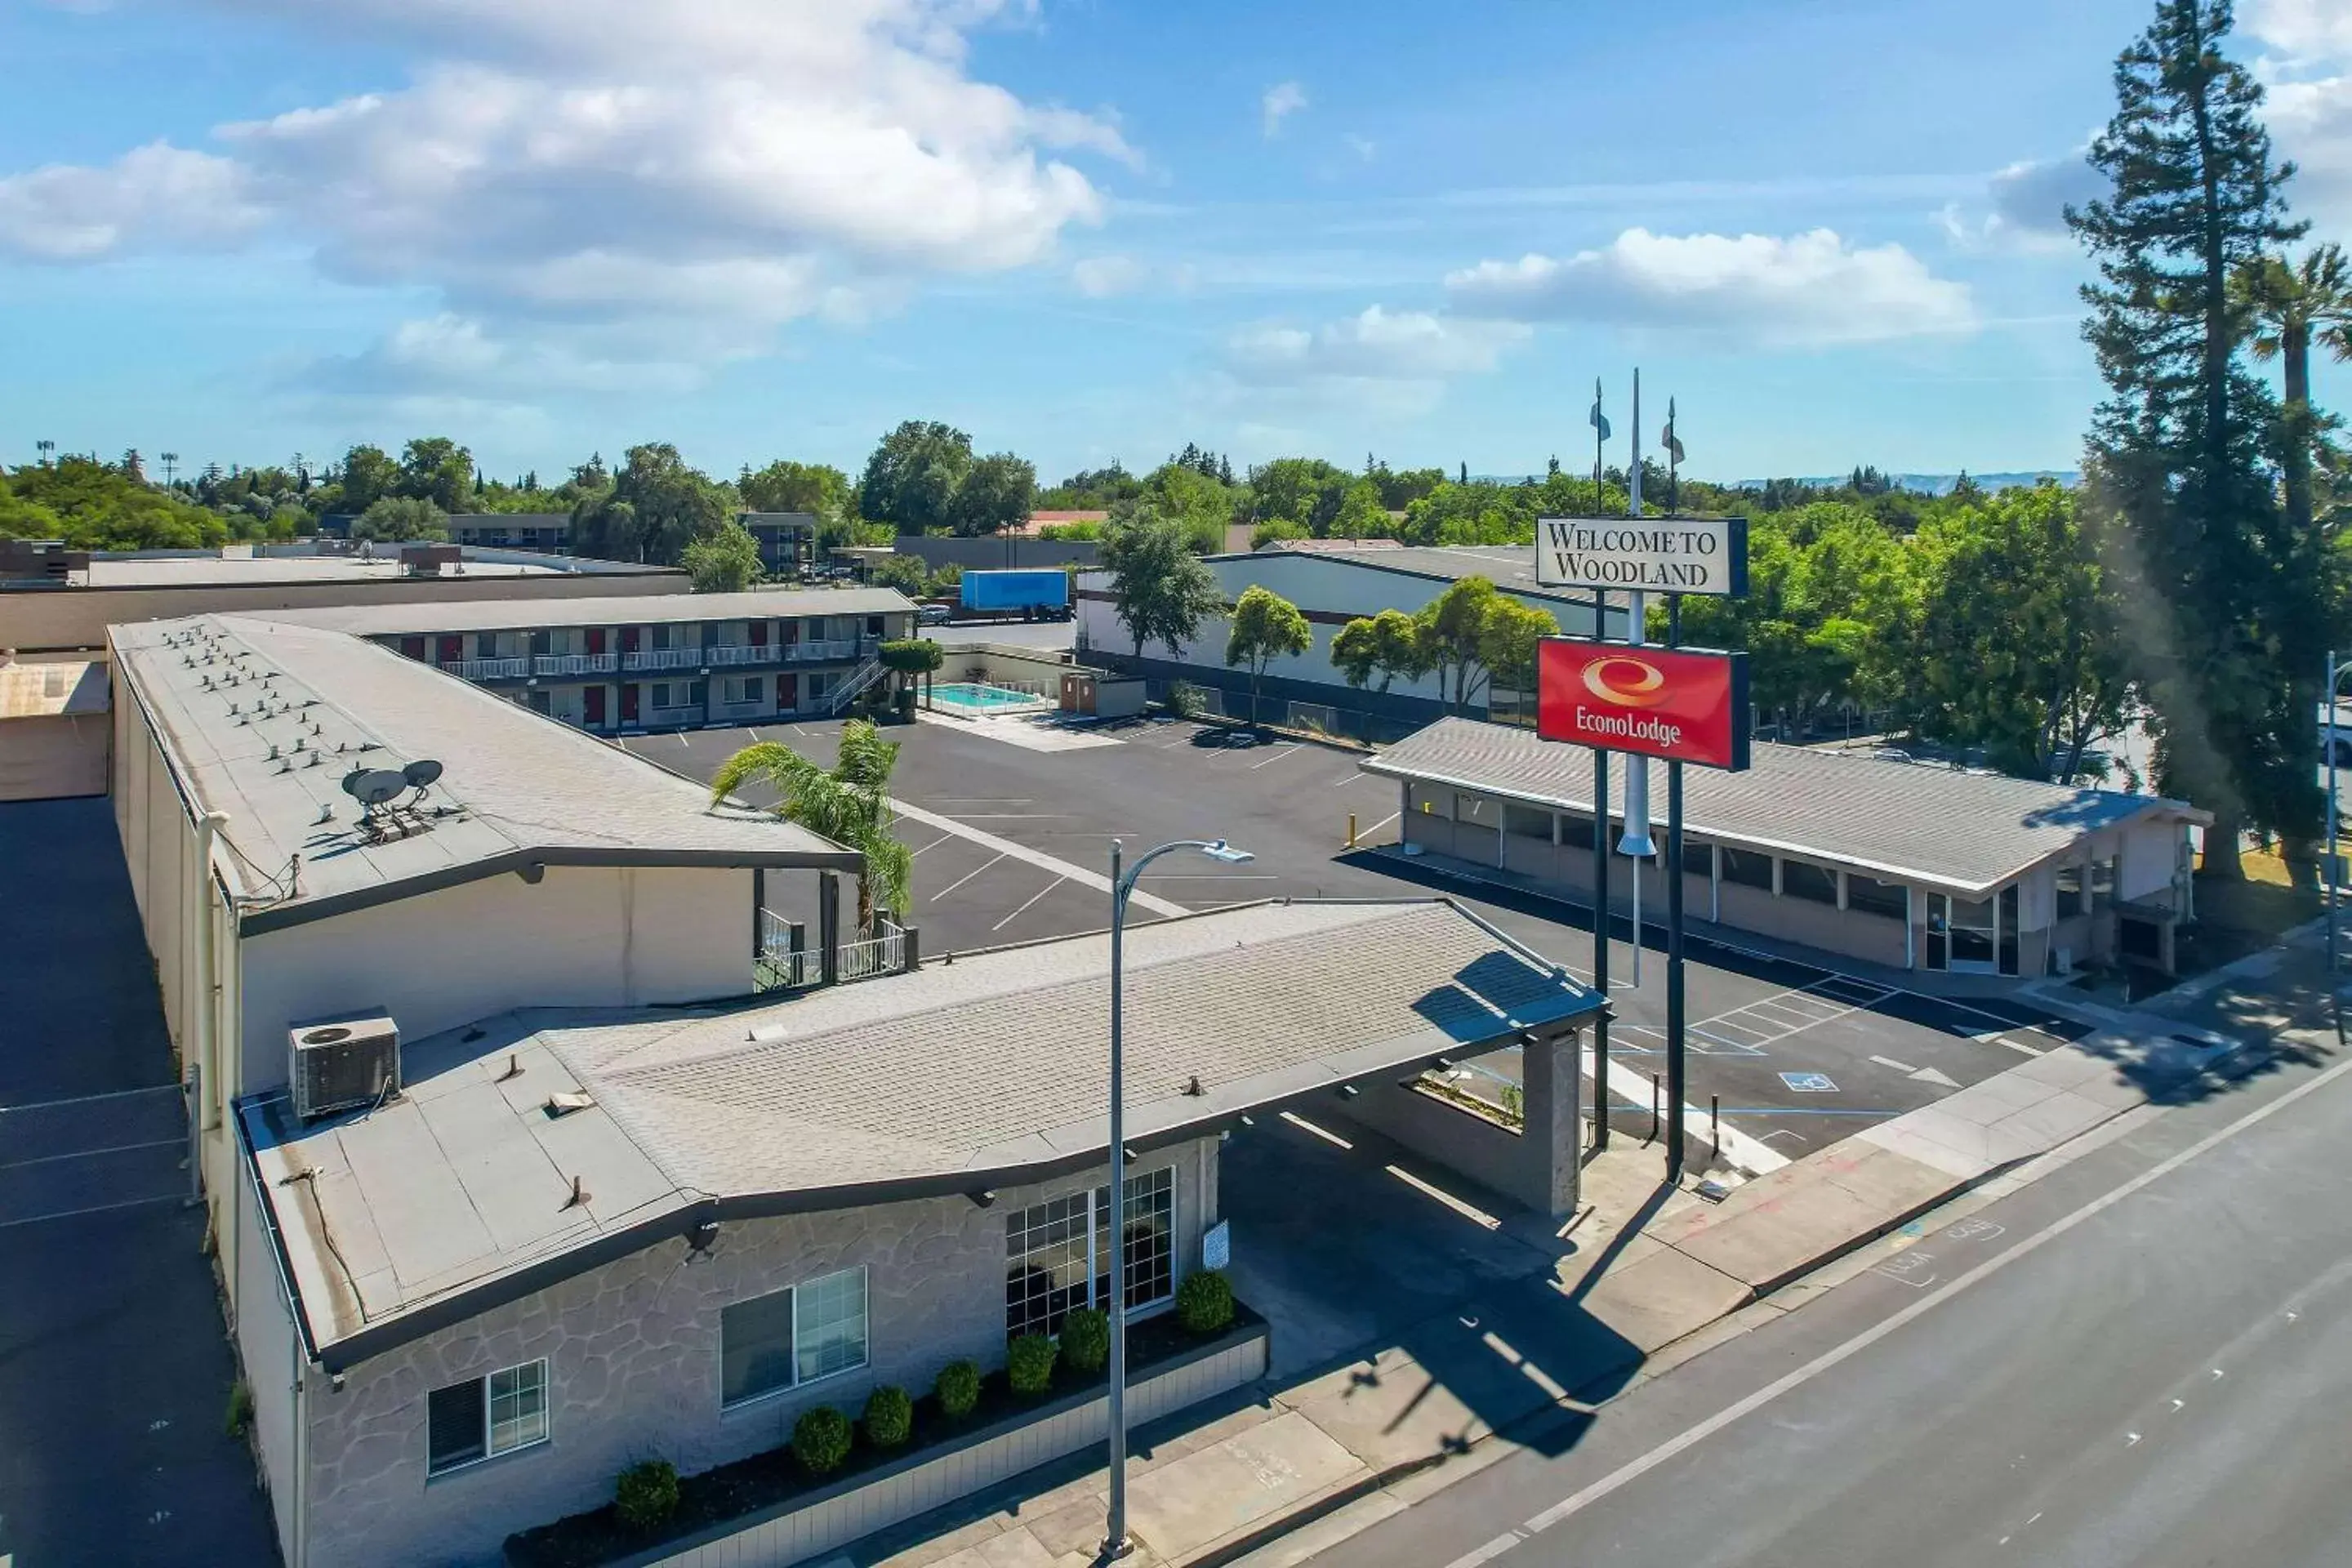 Property building, Pool View in Econo Lodge Woodland near I-5